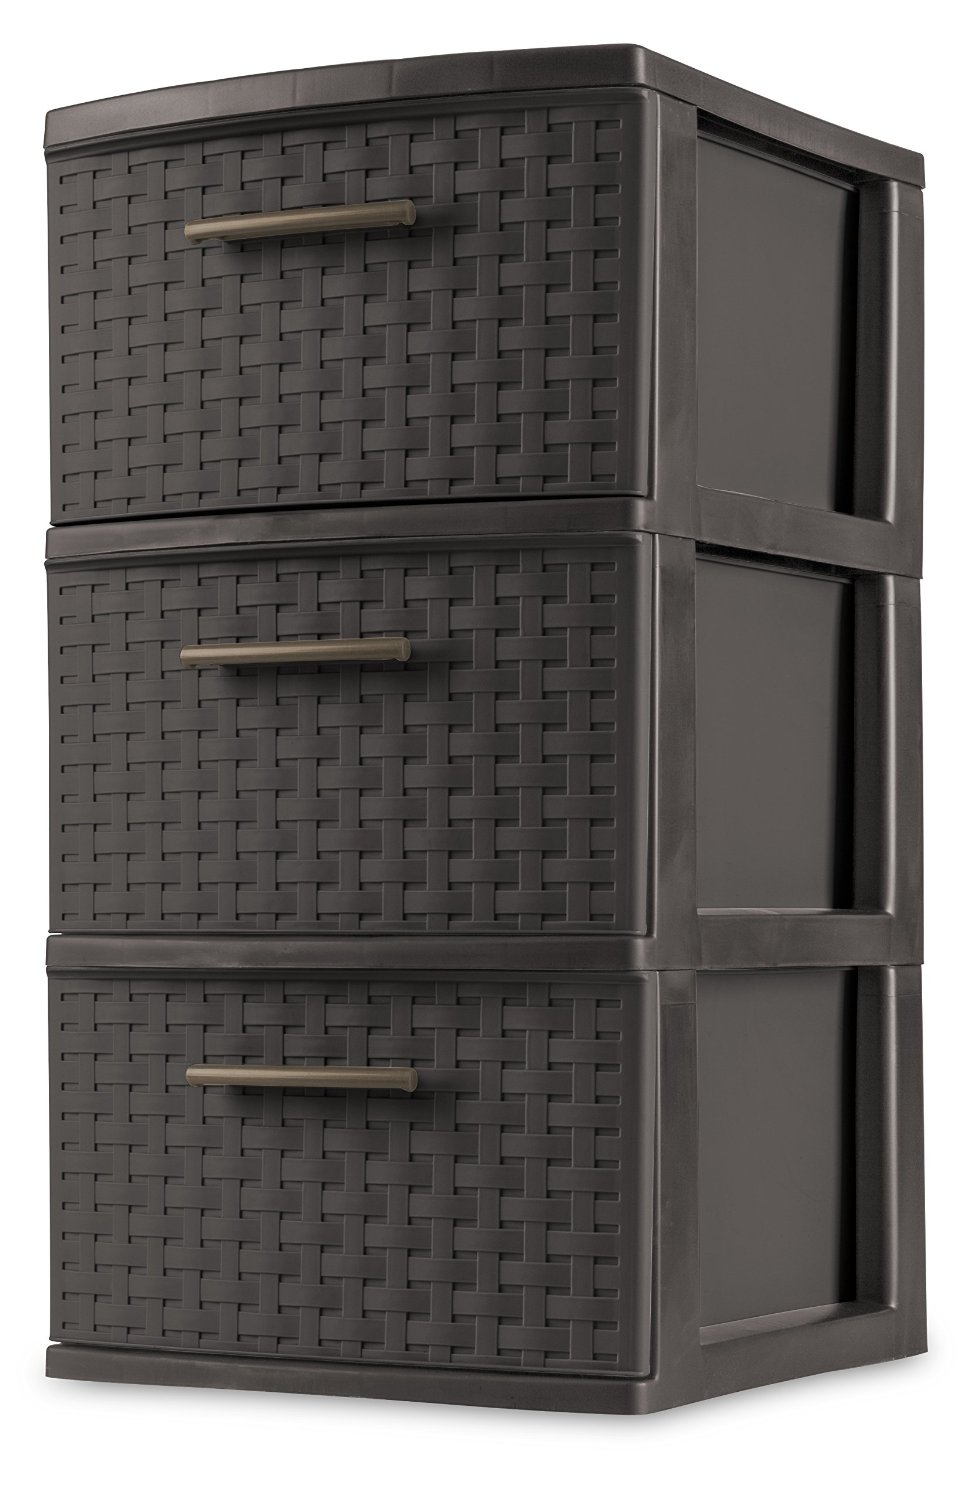 Sterilite 3 Drawer Weave Tower – 2 Pack – Just $23.92!